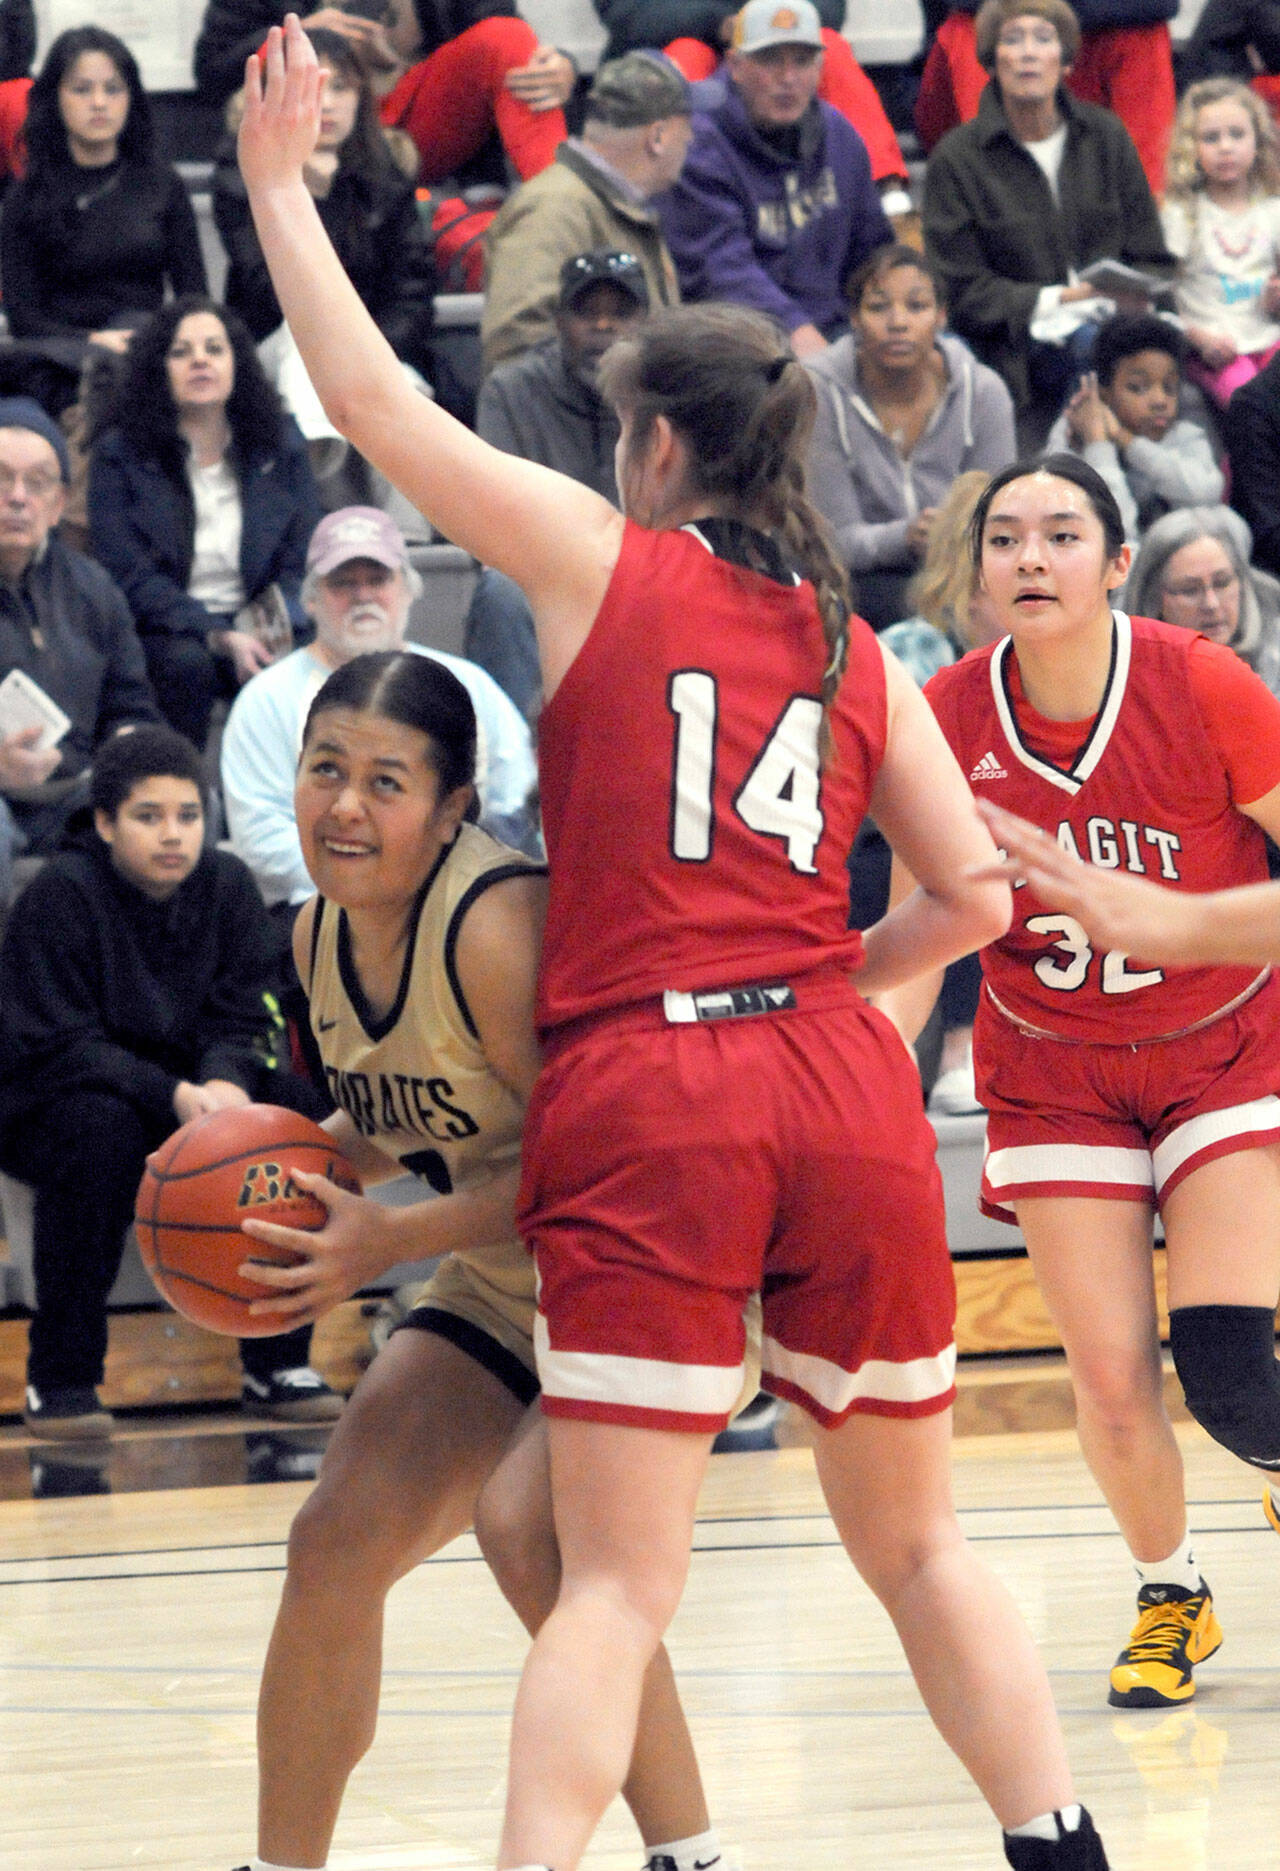 KEITH THORPE/PENINSULA DAILY NEWS
Peninsula's Tatianna Kaemae, left, tries to squeeze past Skagit Valley's Jenae Rhoads while Skagit's Sarah Cook, right, looks on during Wednesday night's conference game in Port Angeles.